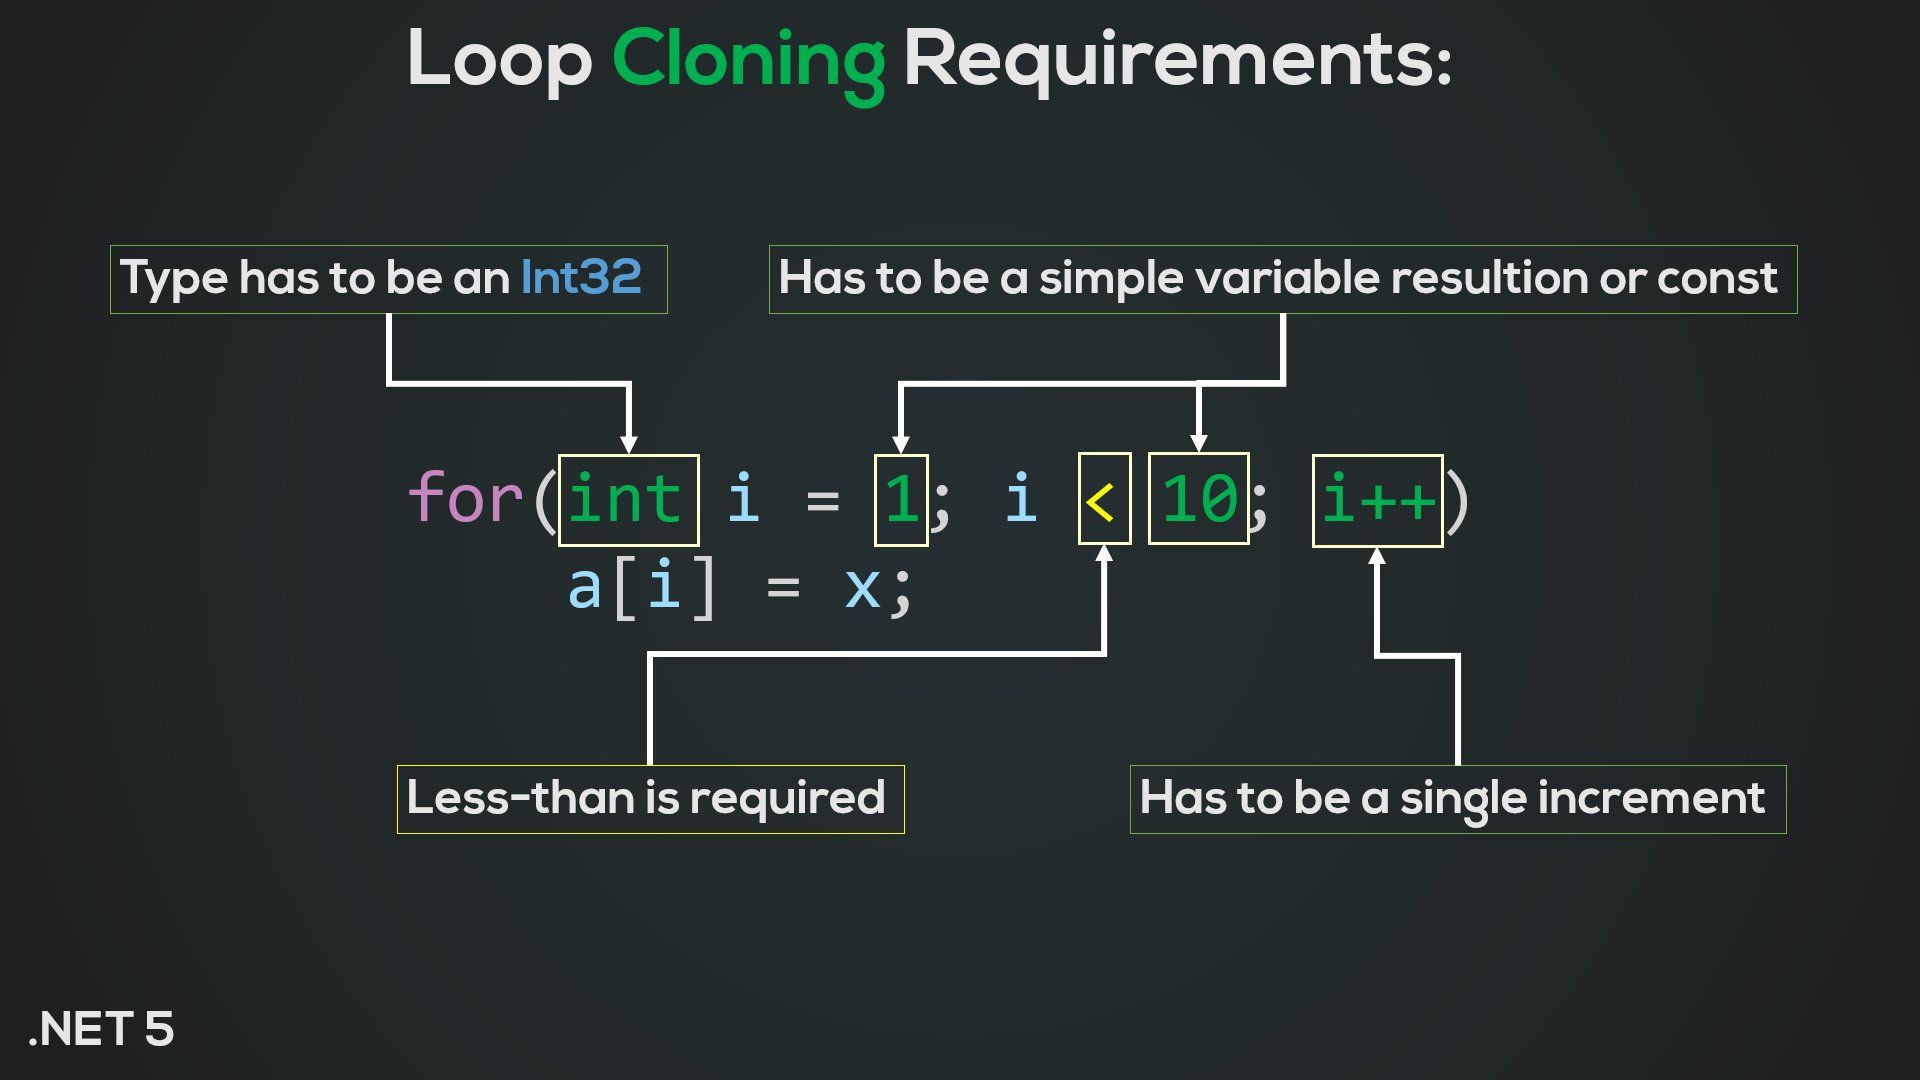 Loop Optimizations in C# (and various other compilers)